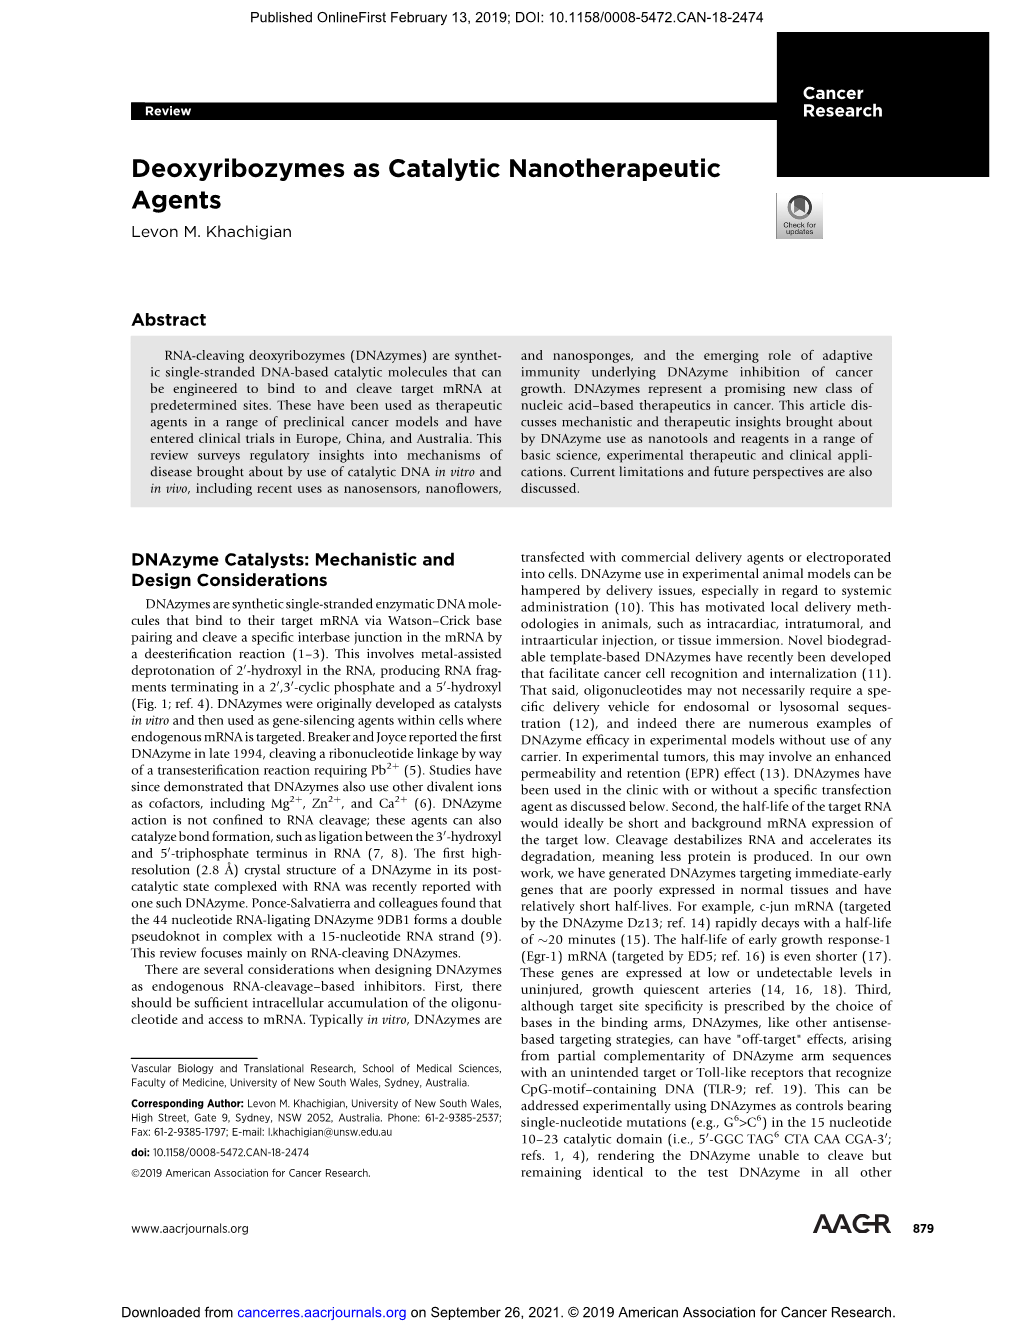 Deoxyribozymes As Catalytic Nanotherapeutic Agents Levon M